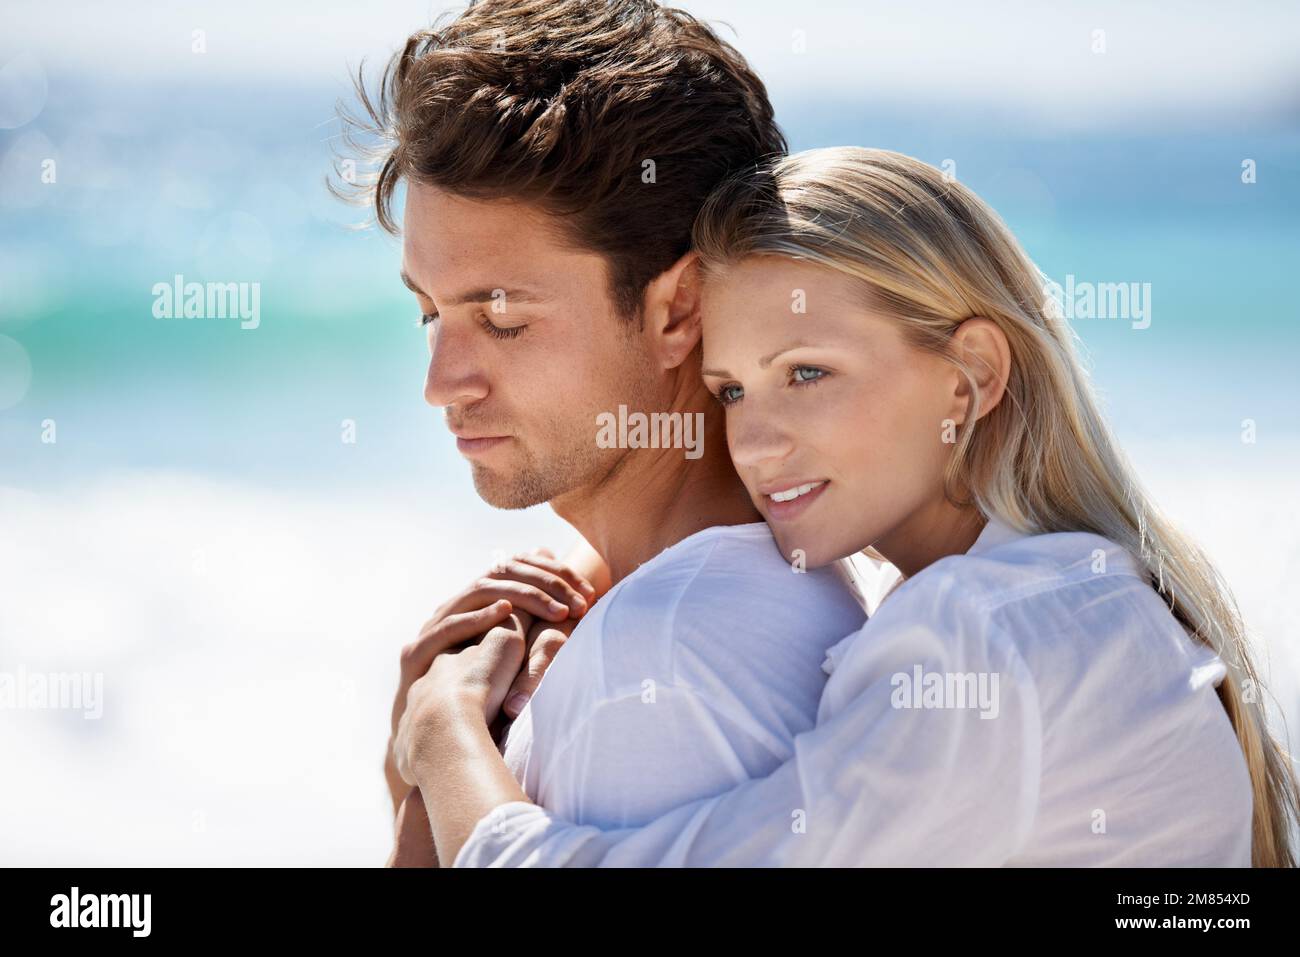 Enjoying a romantic getaway. A young couple having an intimate moment on the beach. Stock Photo